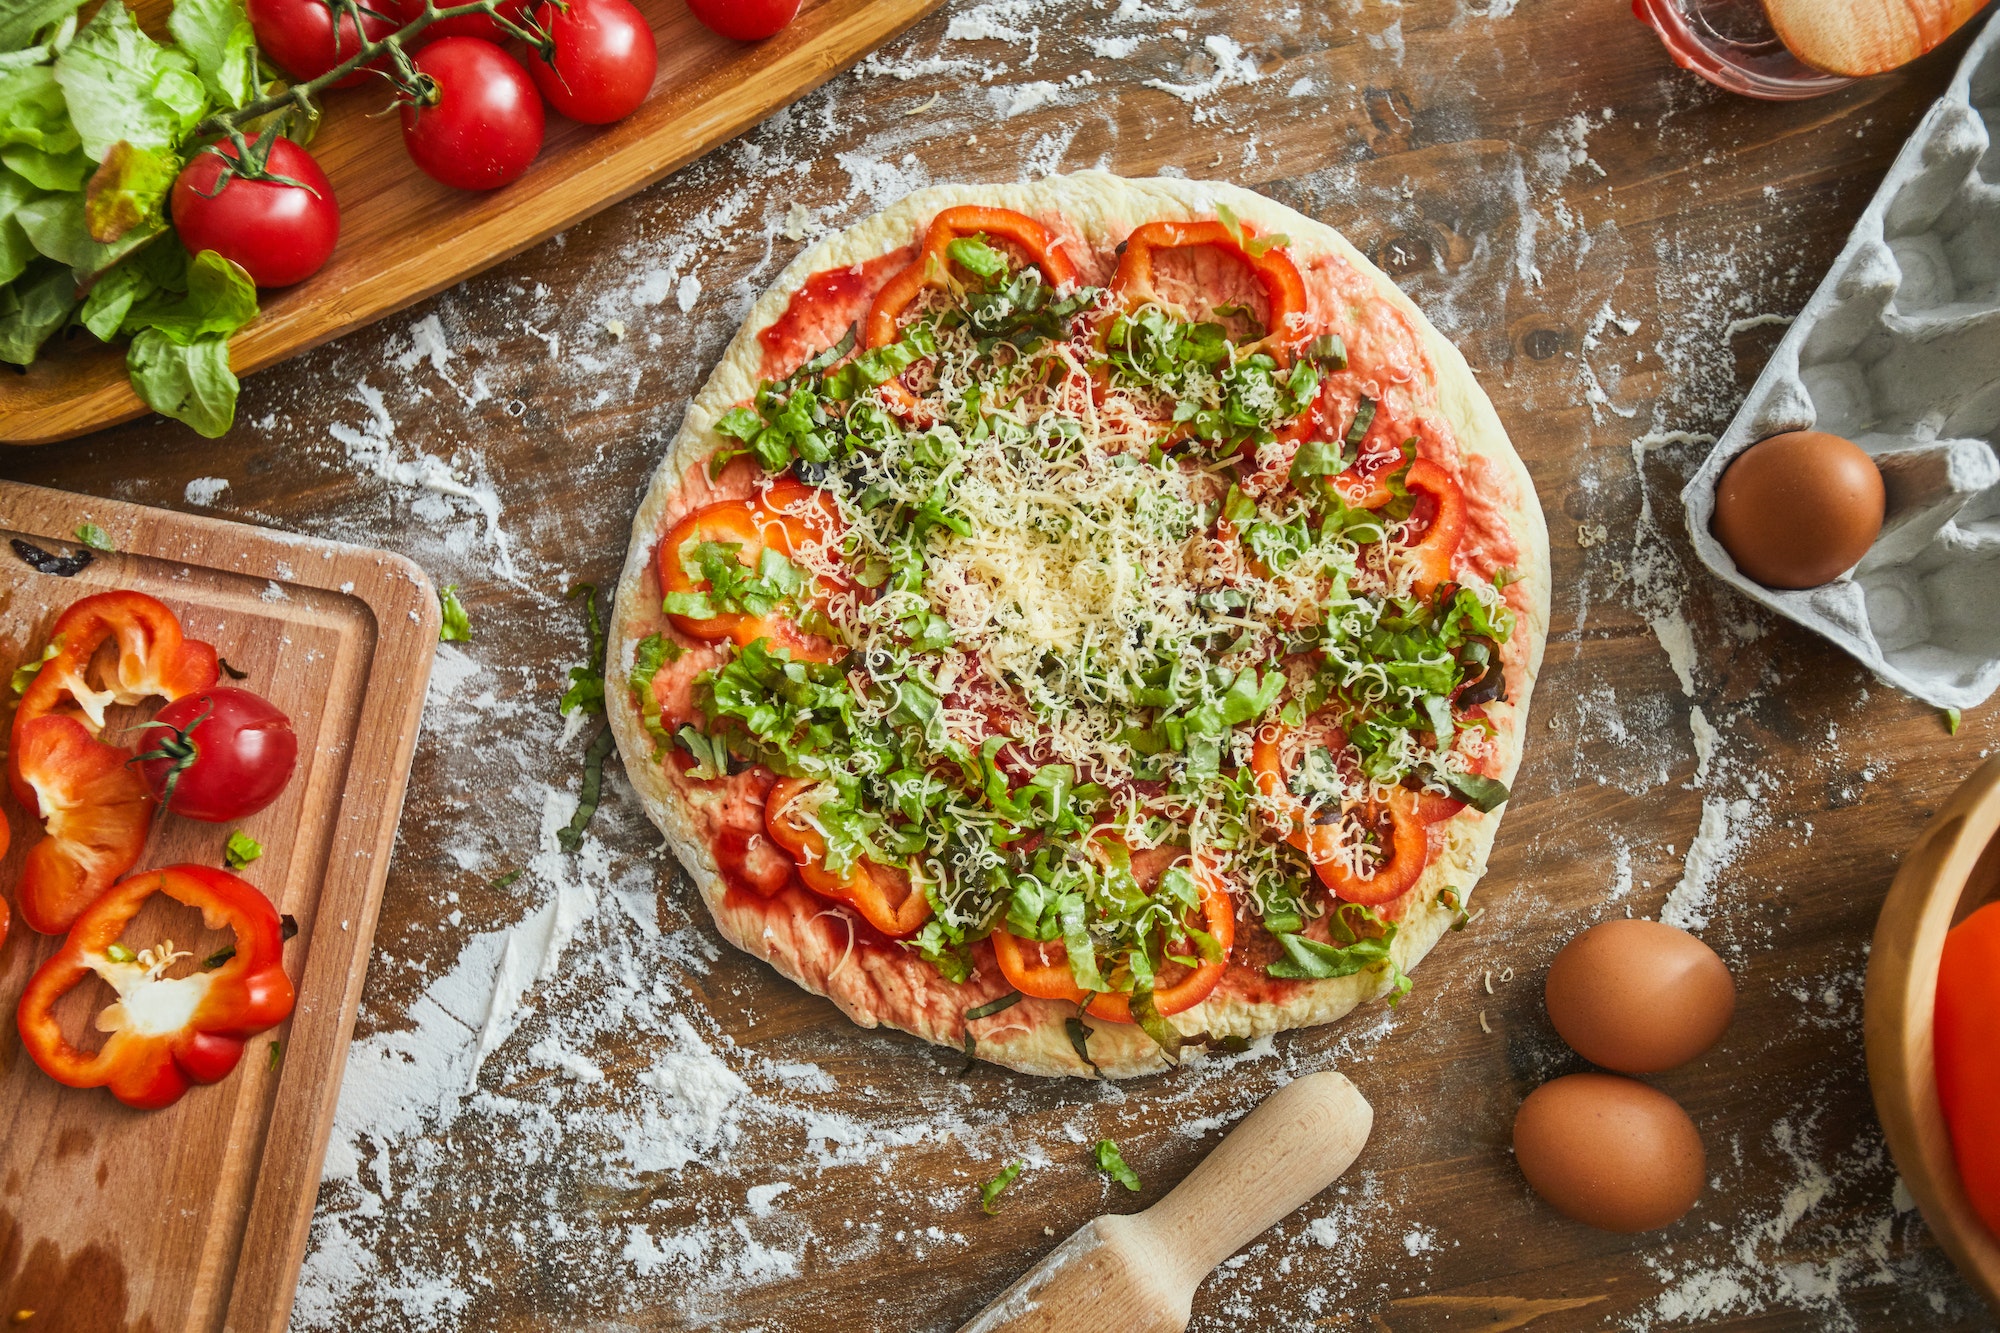 Homemade pizza with vegetables